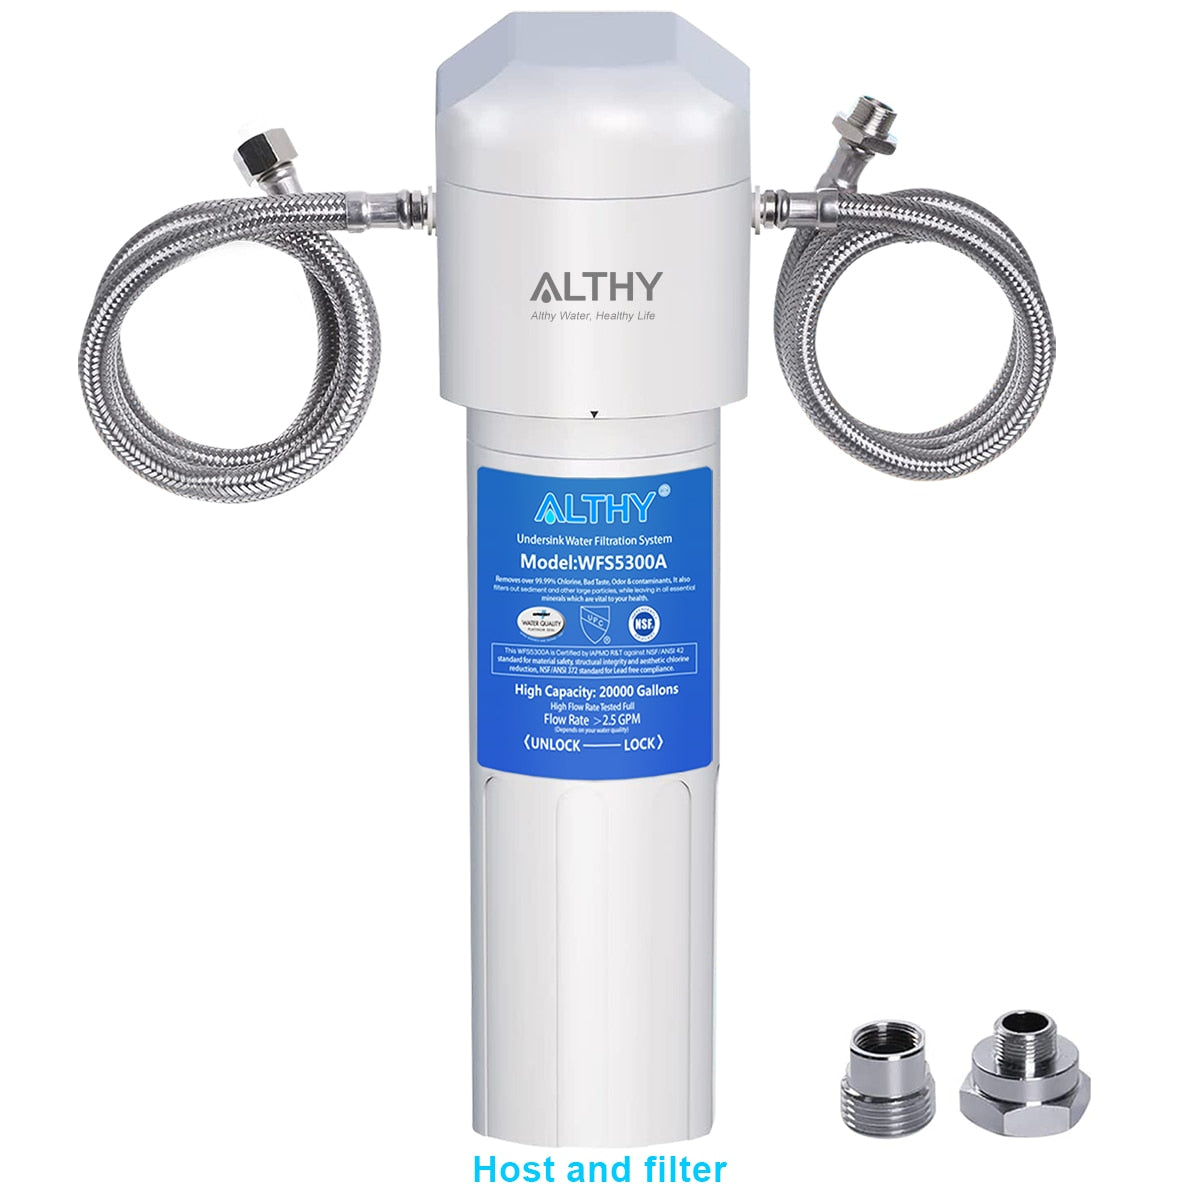 ALTHY Under Sink Drinking Water Filter Purifier -NSF/ANSI Certified Direct Connect Under Counter Drink Water Filtration System HostandFilterChina Hardware > Plumbing > Water Dispensing & Filtration 226.99 EZYSELLA SHOP